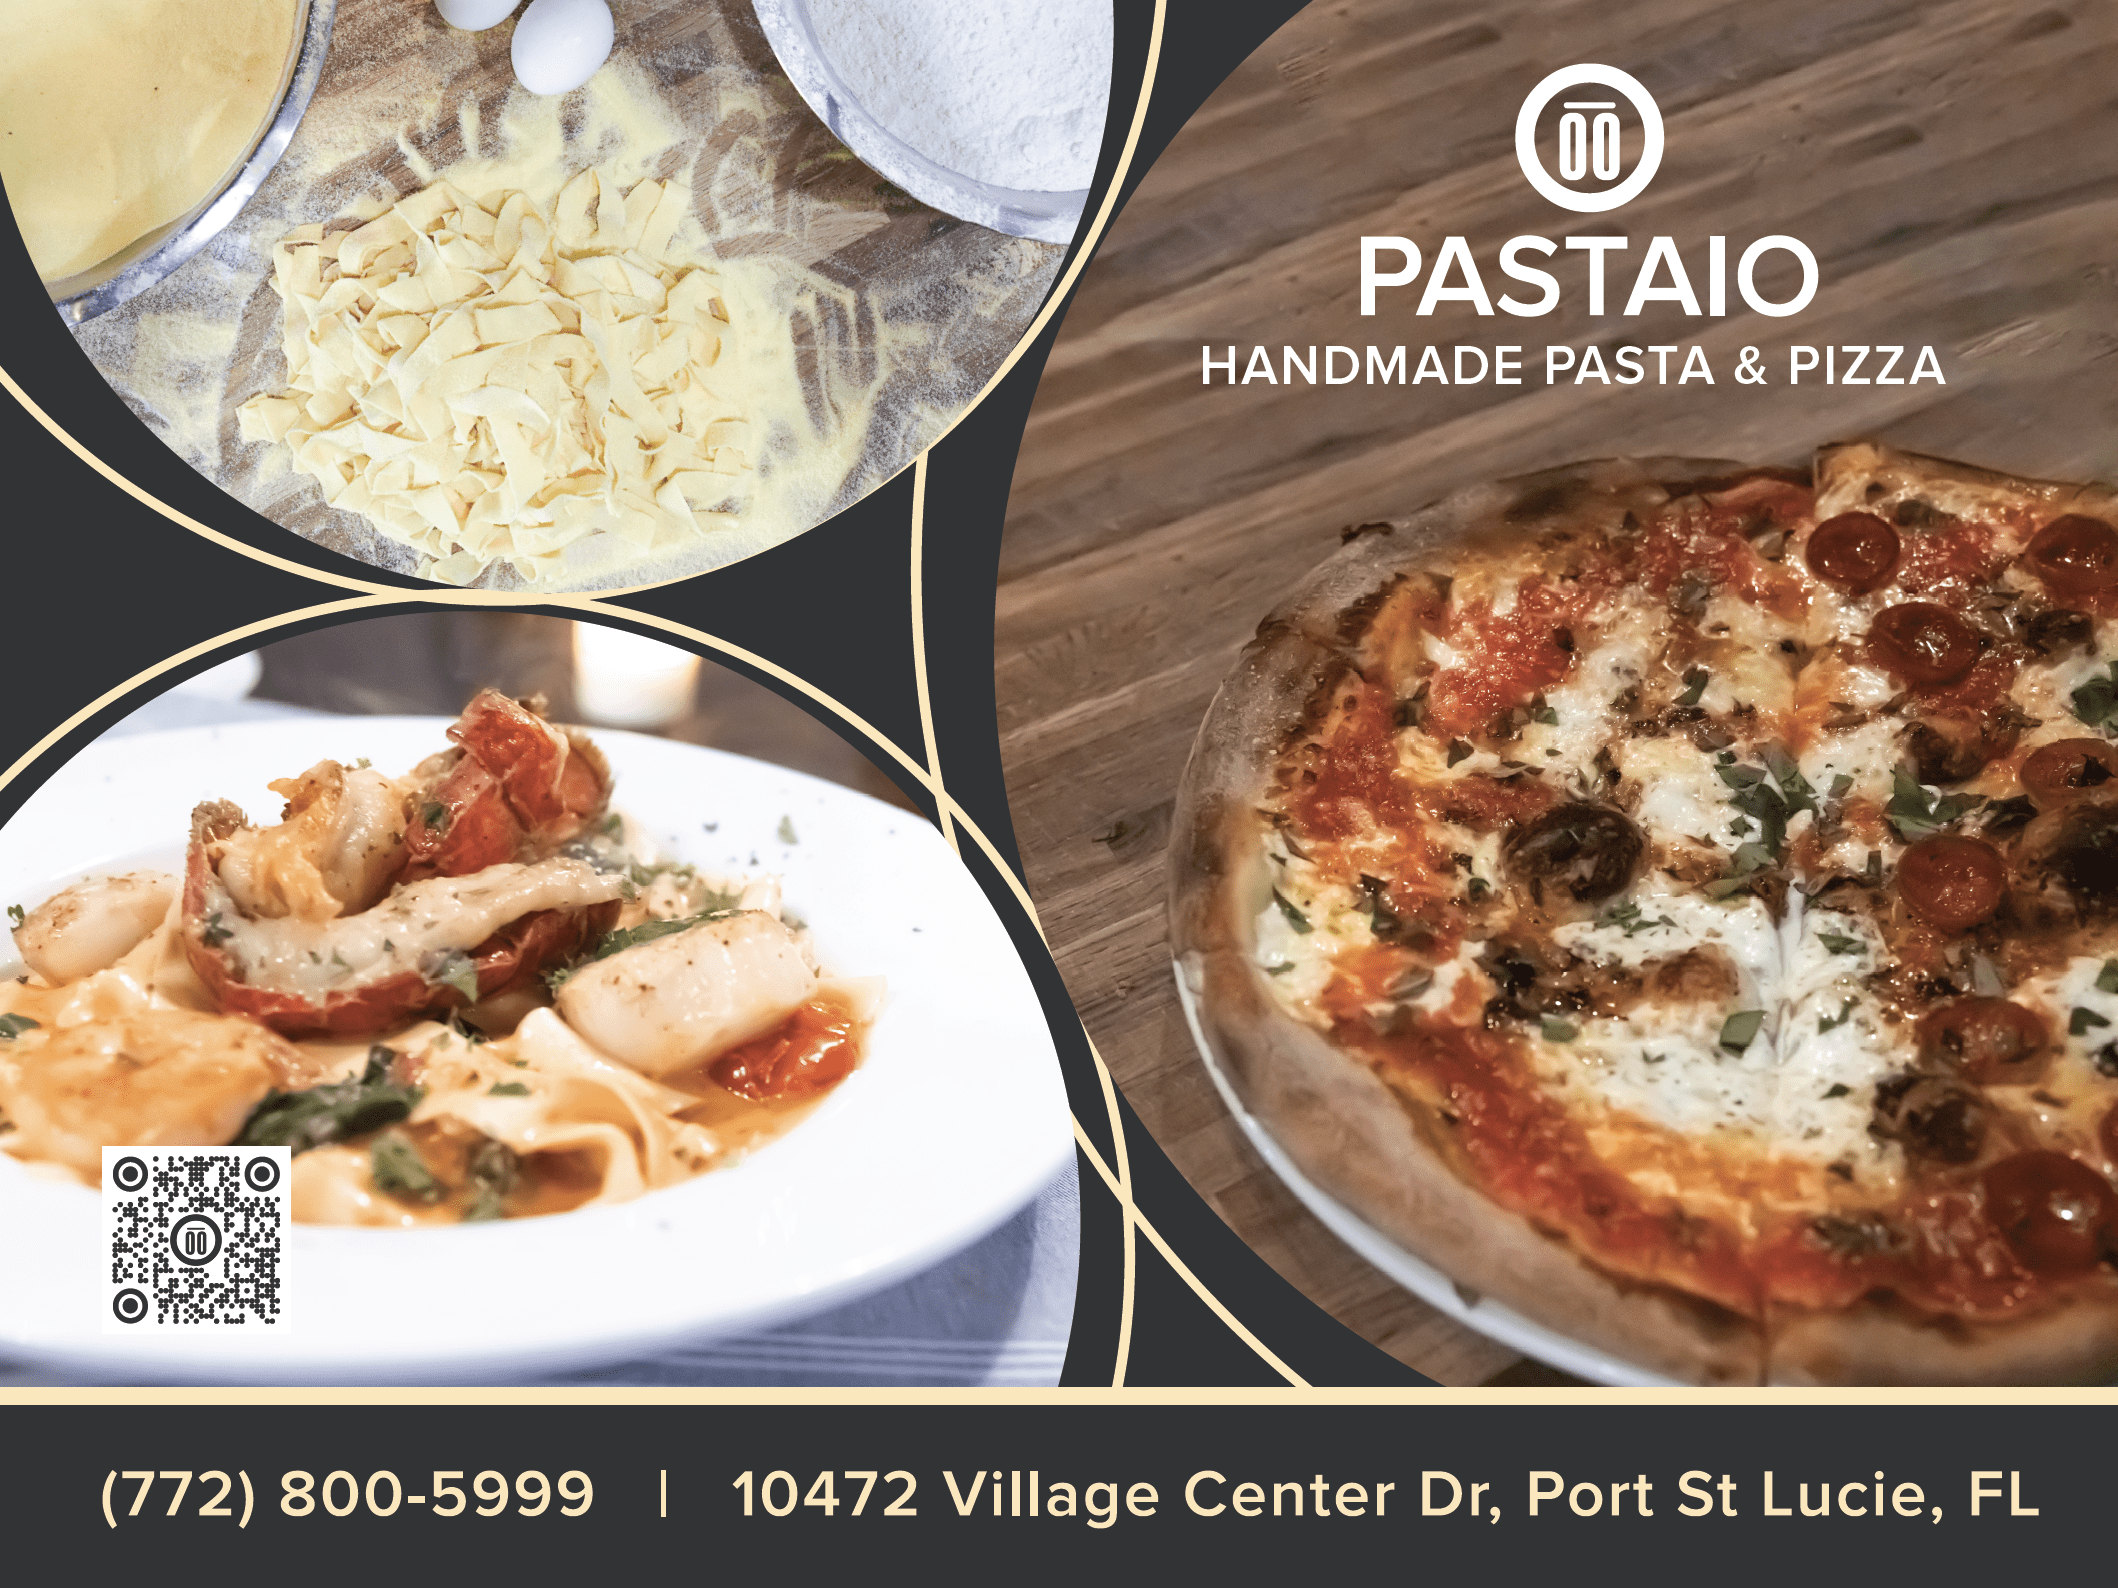 Pastaio Handmade Pasta•Pizza - Port St. Lucie, FL, US, all you can eat